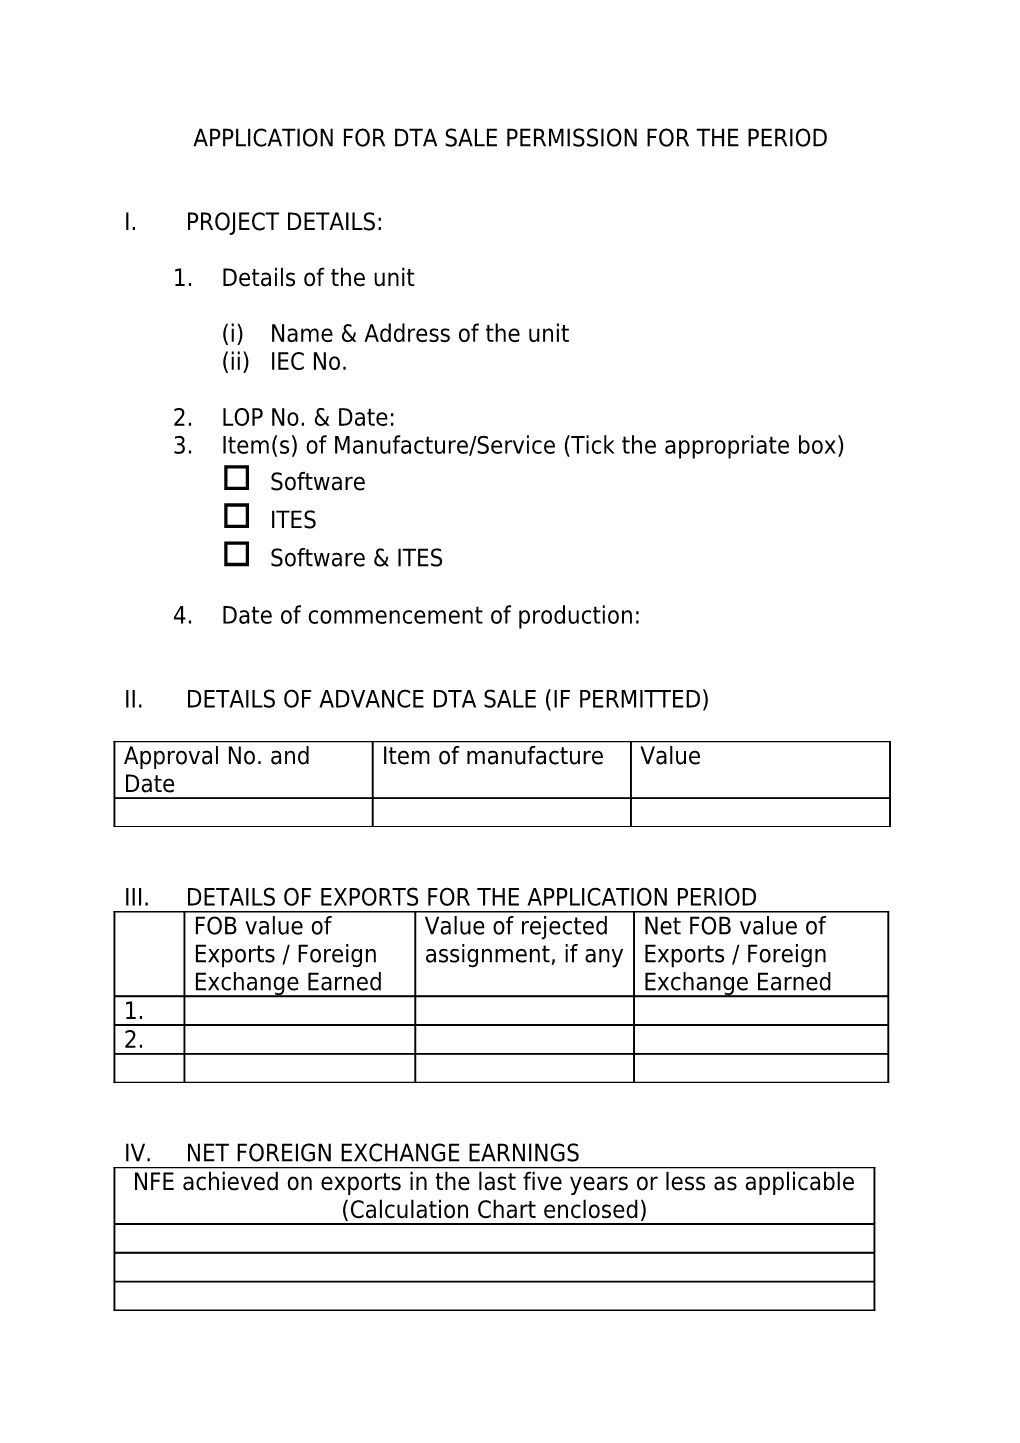 Application for Dta Sale Permission for the Period